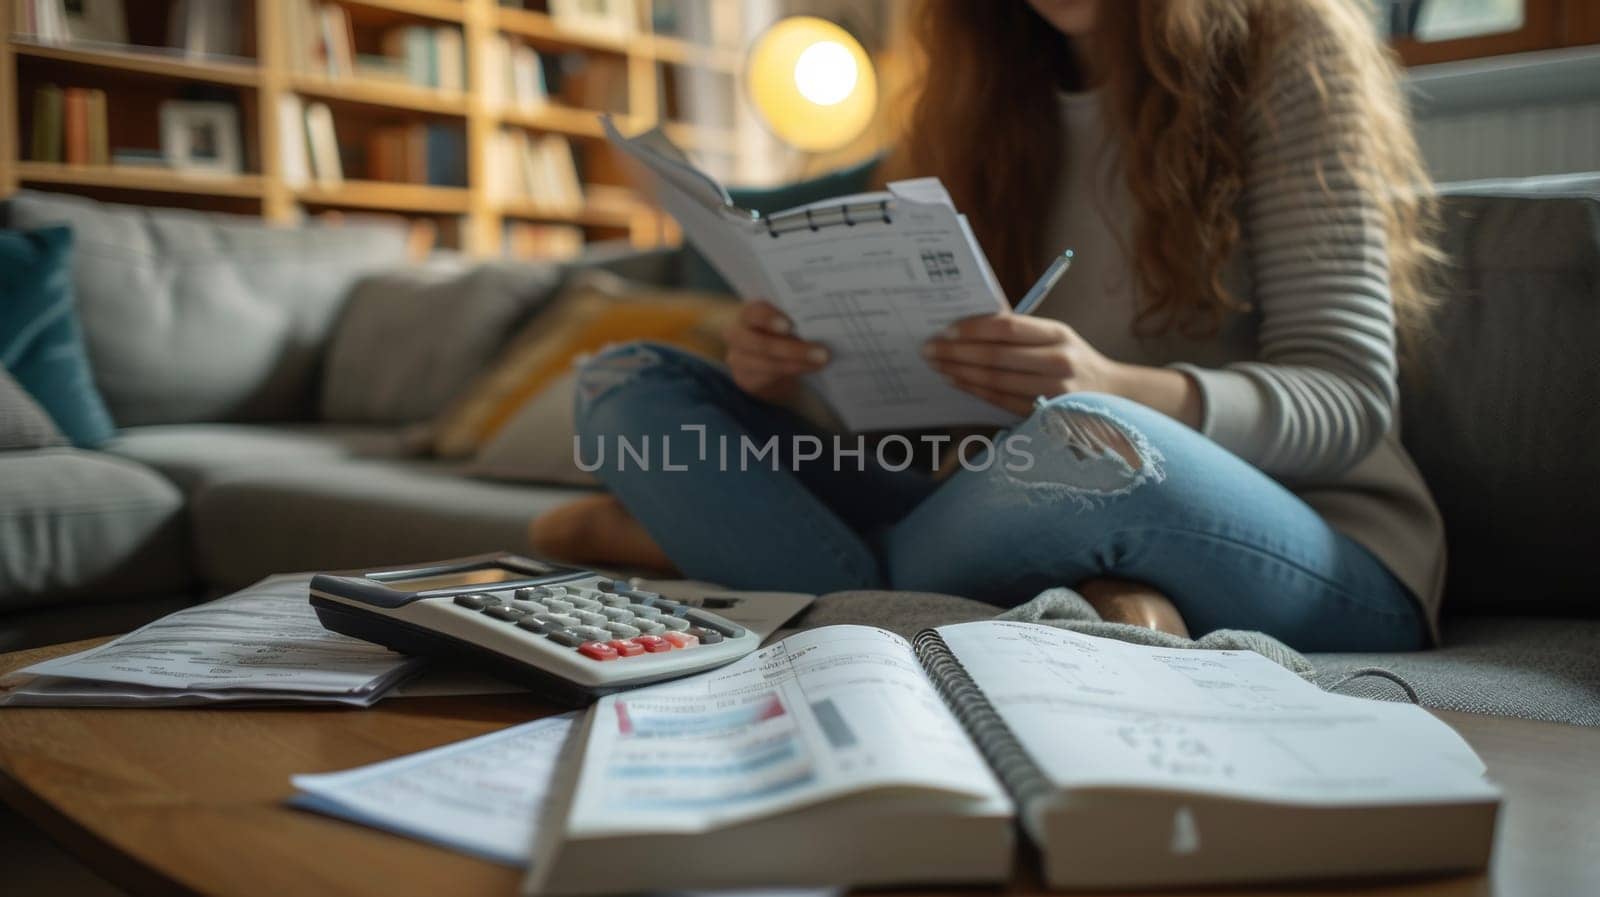 A woman sitting on a couch with books and calculator, AI by starush